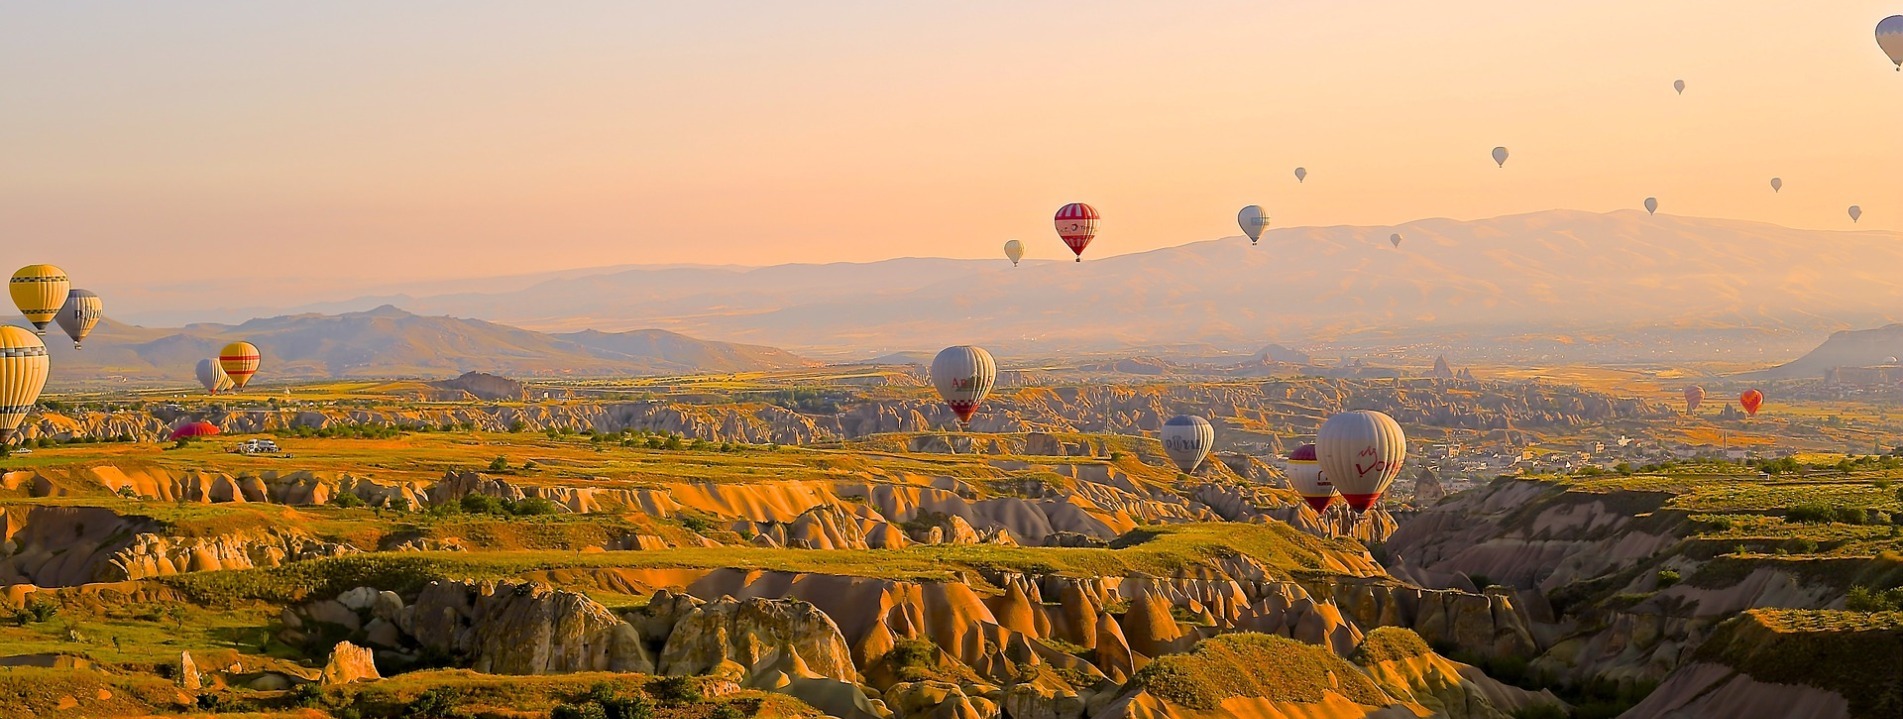 Plan Your First Trip to Turkey in 5 Easy Steps